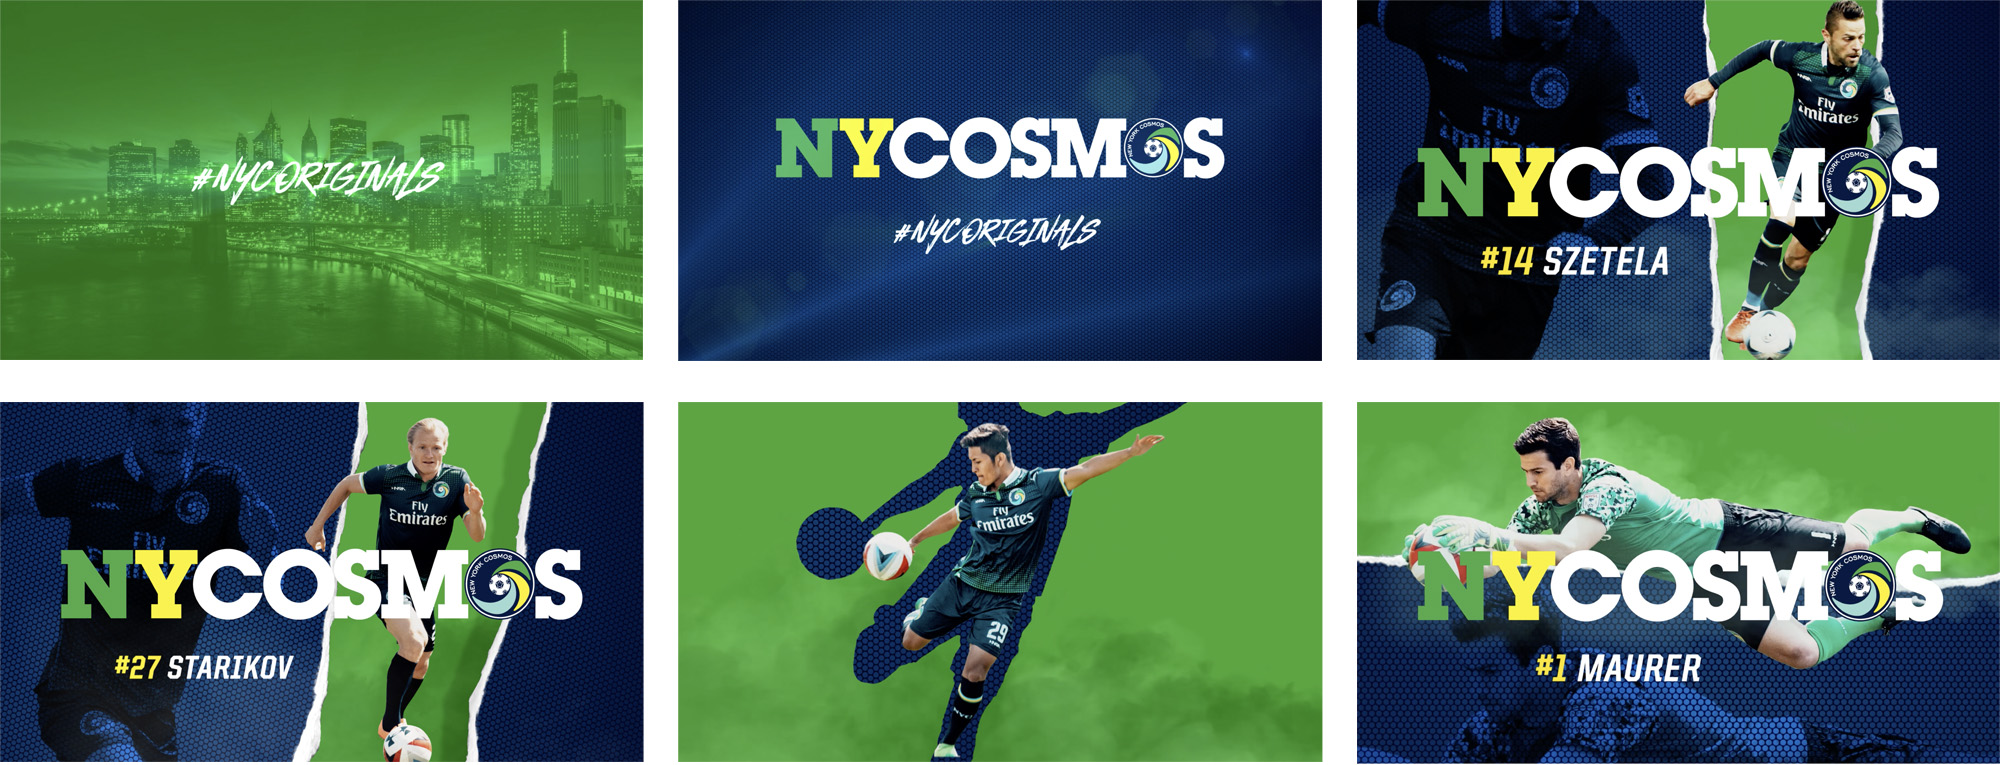 nycosmos5